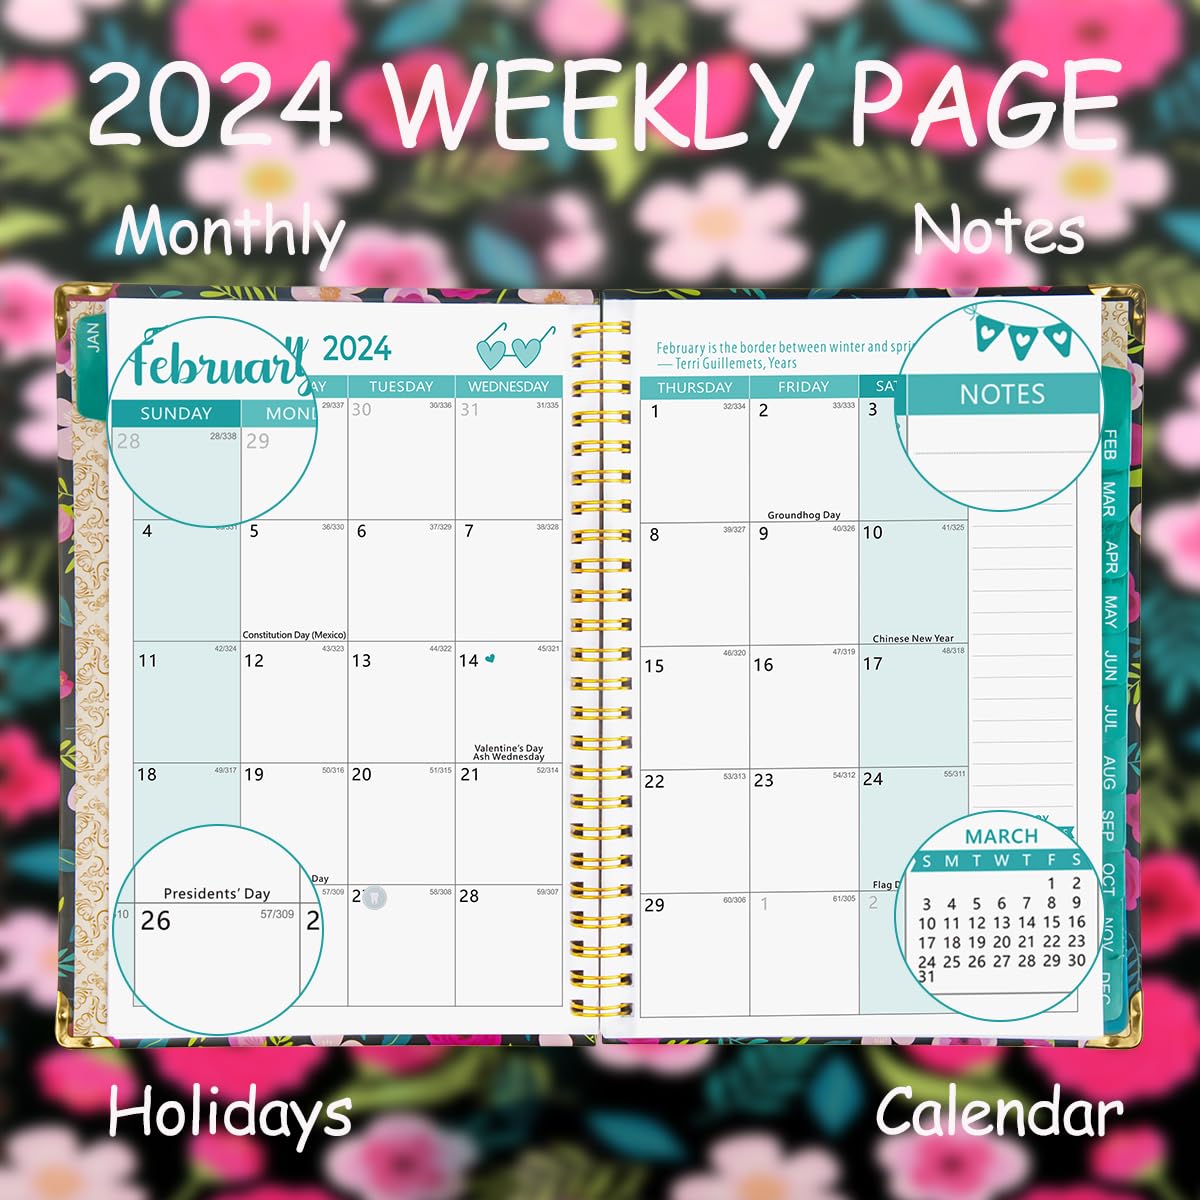 NADSSJL Diary 2024-2024 Diary A5 Week to View, Jan.2024 - Dec.2024, Twin-wire Binding, Beautiful Hardcover, Inner Pocket, 21.5 x 15.5 x 1.5 cm - White